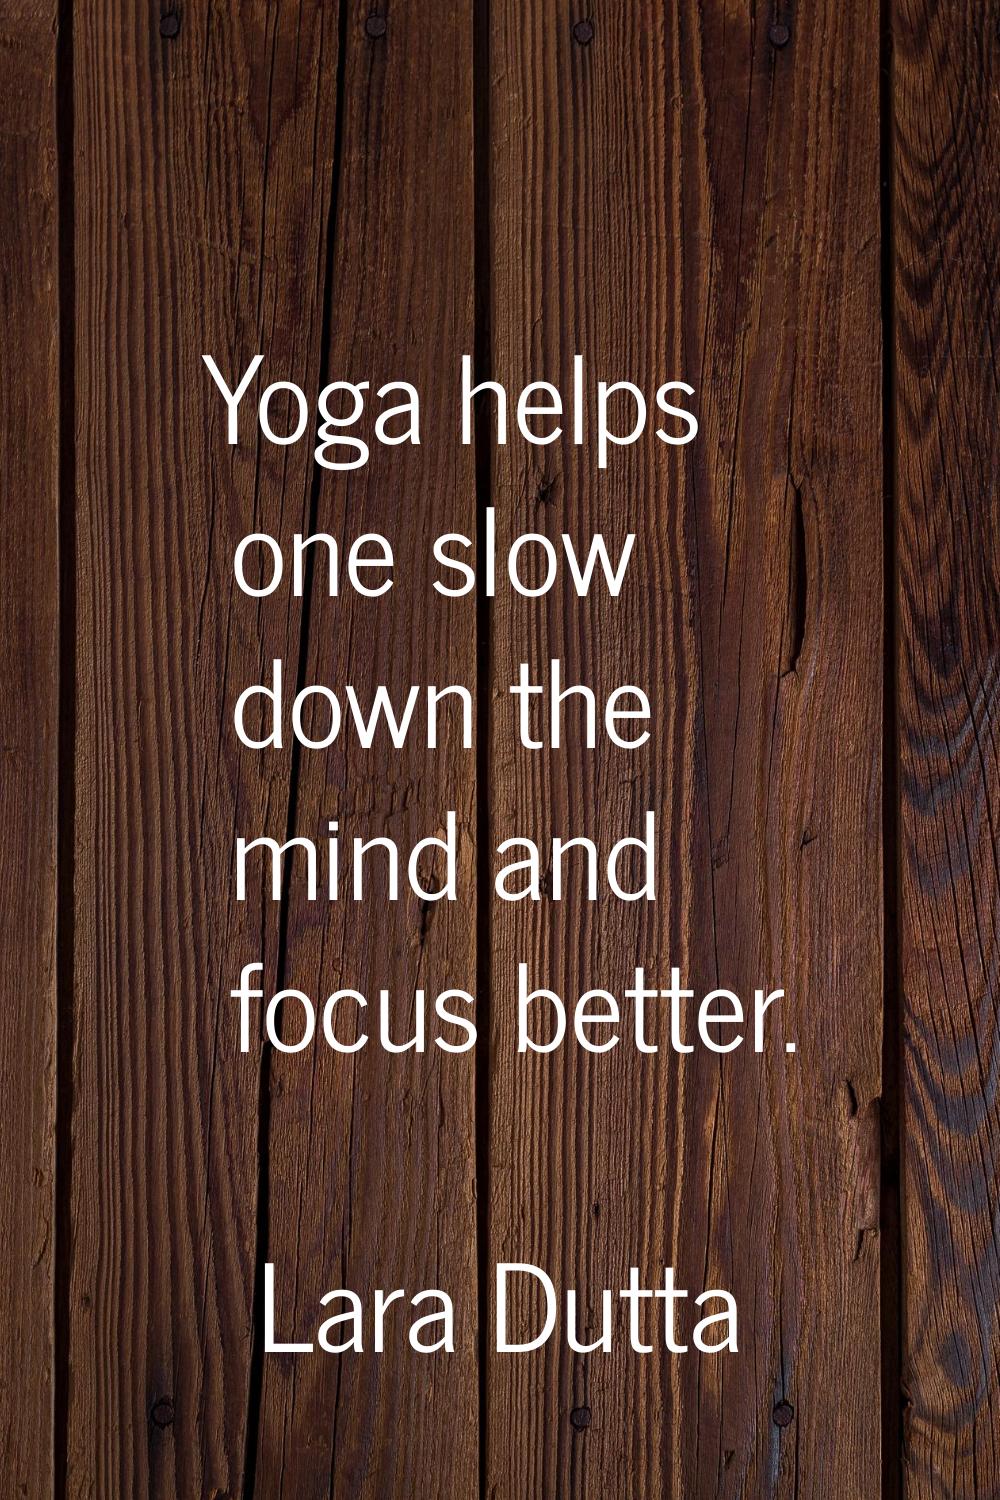 Yoga helps one slow down the mind and focus better.